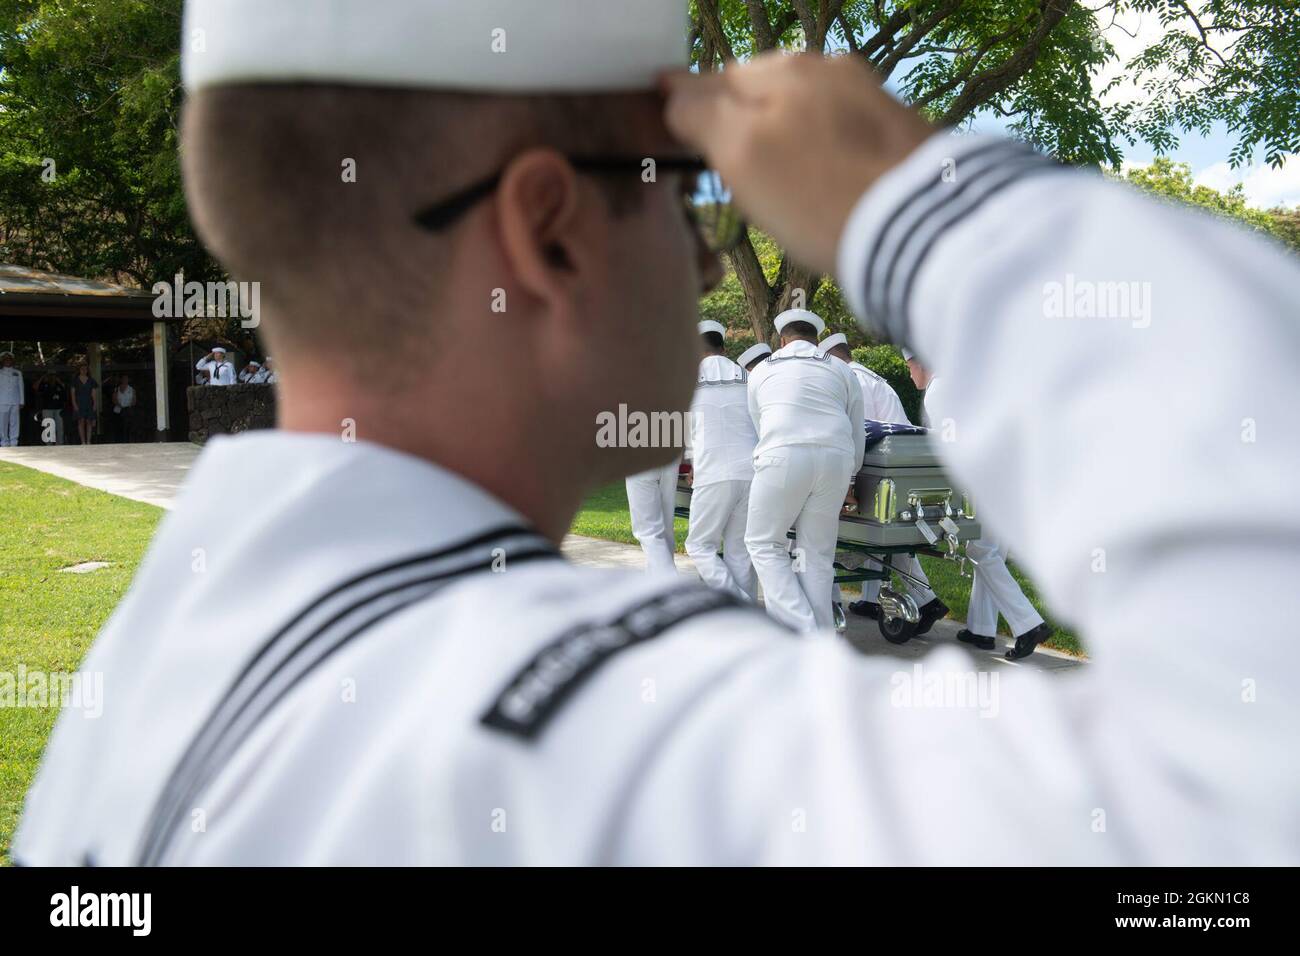 Sailors assigned to Navy Region Hawaii and the Defense POW/MIA Accounting Agency (DPAA) conduct a funeral for U.S. Navy Gunner’s Mate 3rd Class Shelby Treadway, 25, of Manchester, Kentucky, at the National Memorial Cemetery of the Pacific, Honolulu, Hawaii, June 2, 2021. Treadway was assigned to the USS Oklahoma, which sustained fire from Japanese aircraft and multiple torpedo hits causing the ship to capsize and resulted in the deaths of more than 400 crew members on Dec. 7, 1941, at Ford Island, Pearl Harbor. Treadway was recently identified through DNA analysis by the DPAA forensic laborato Stock Photo